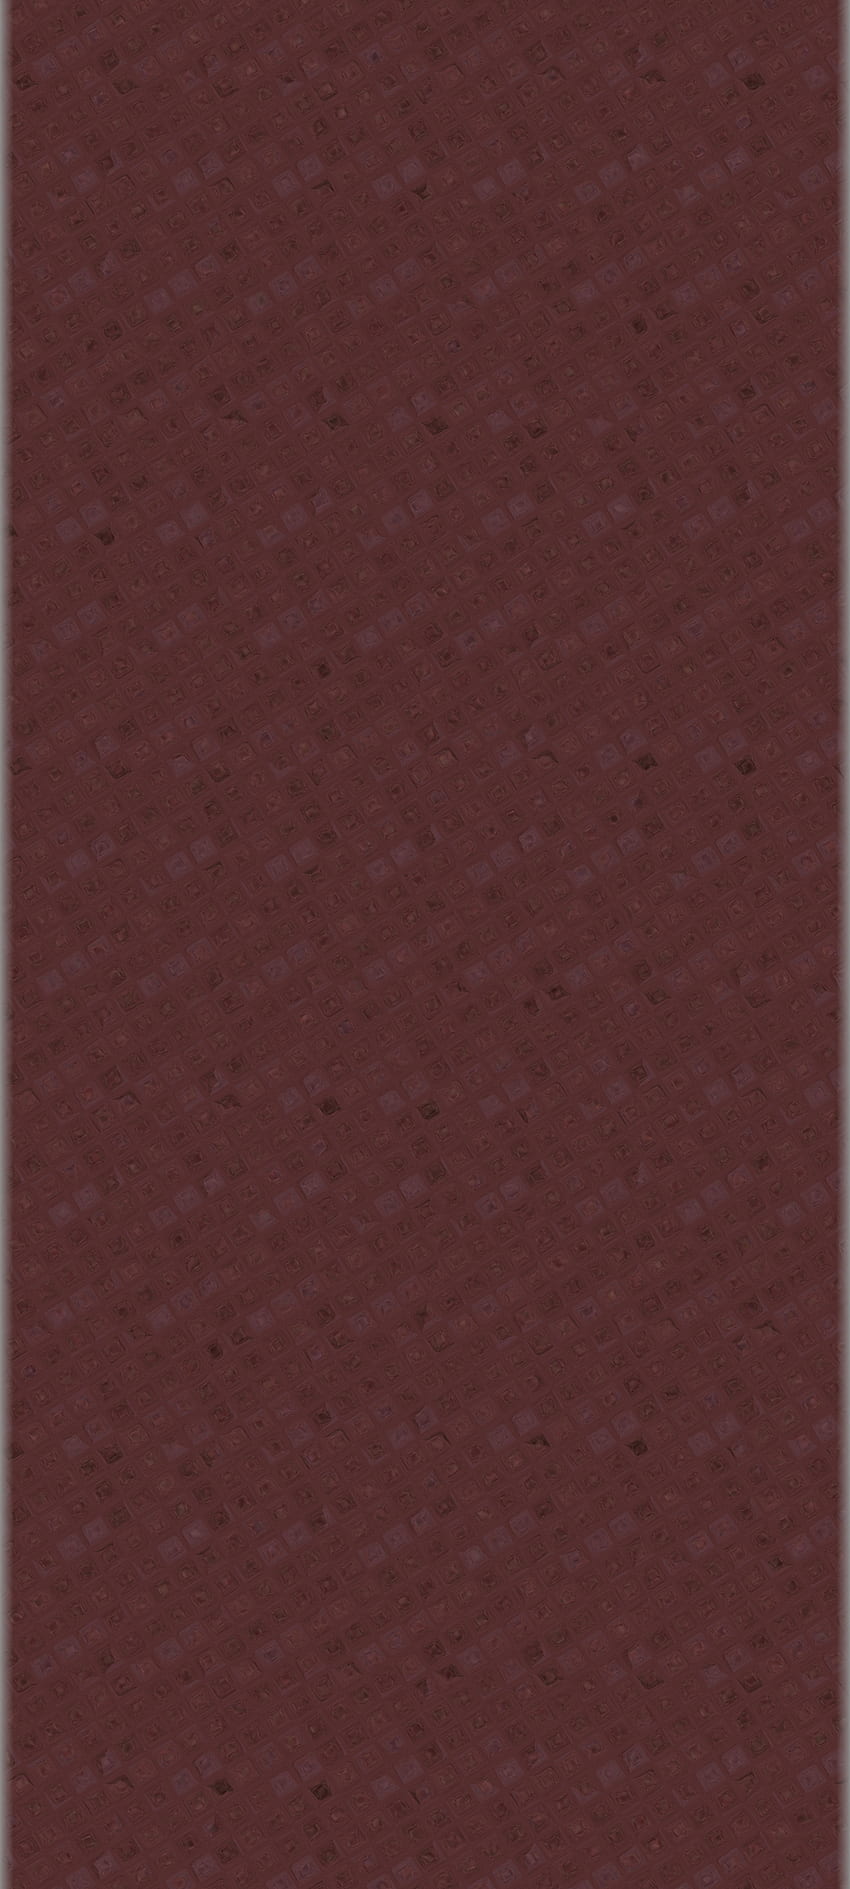 No1-Home Screen, iPhone, Basic, Galaxy, New, Art, iPhone 13, pattern, Cool, Modern, Surface, , design, Smooth, locked, A51, soft, Background, Galaxy S21, Druffix, 2021, brown, M32, Magma, Android, Acer, No1, Apple, Colors, S10, Galaxy A32, Love, Home Screen, LG, Samsung, Edge, Nokia, Original, Smartphone Sfondo del telefono HD